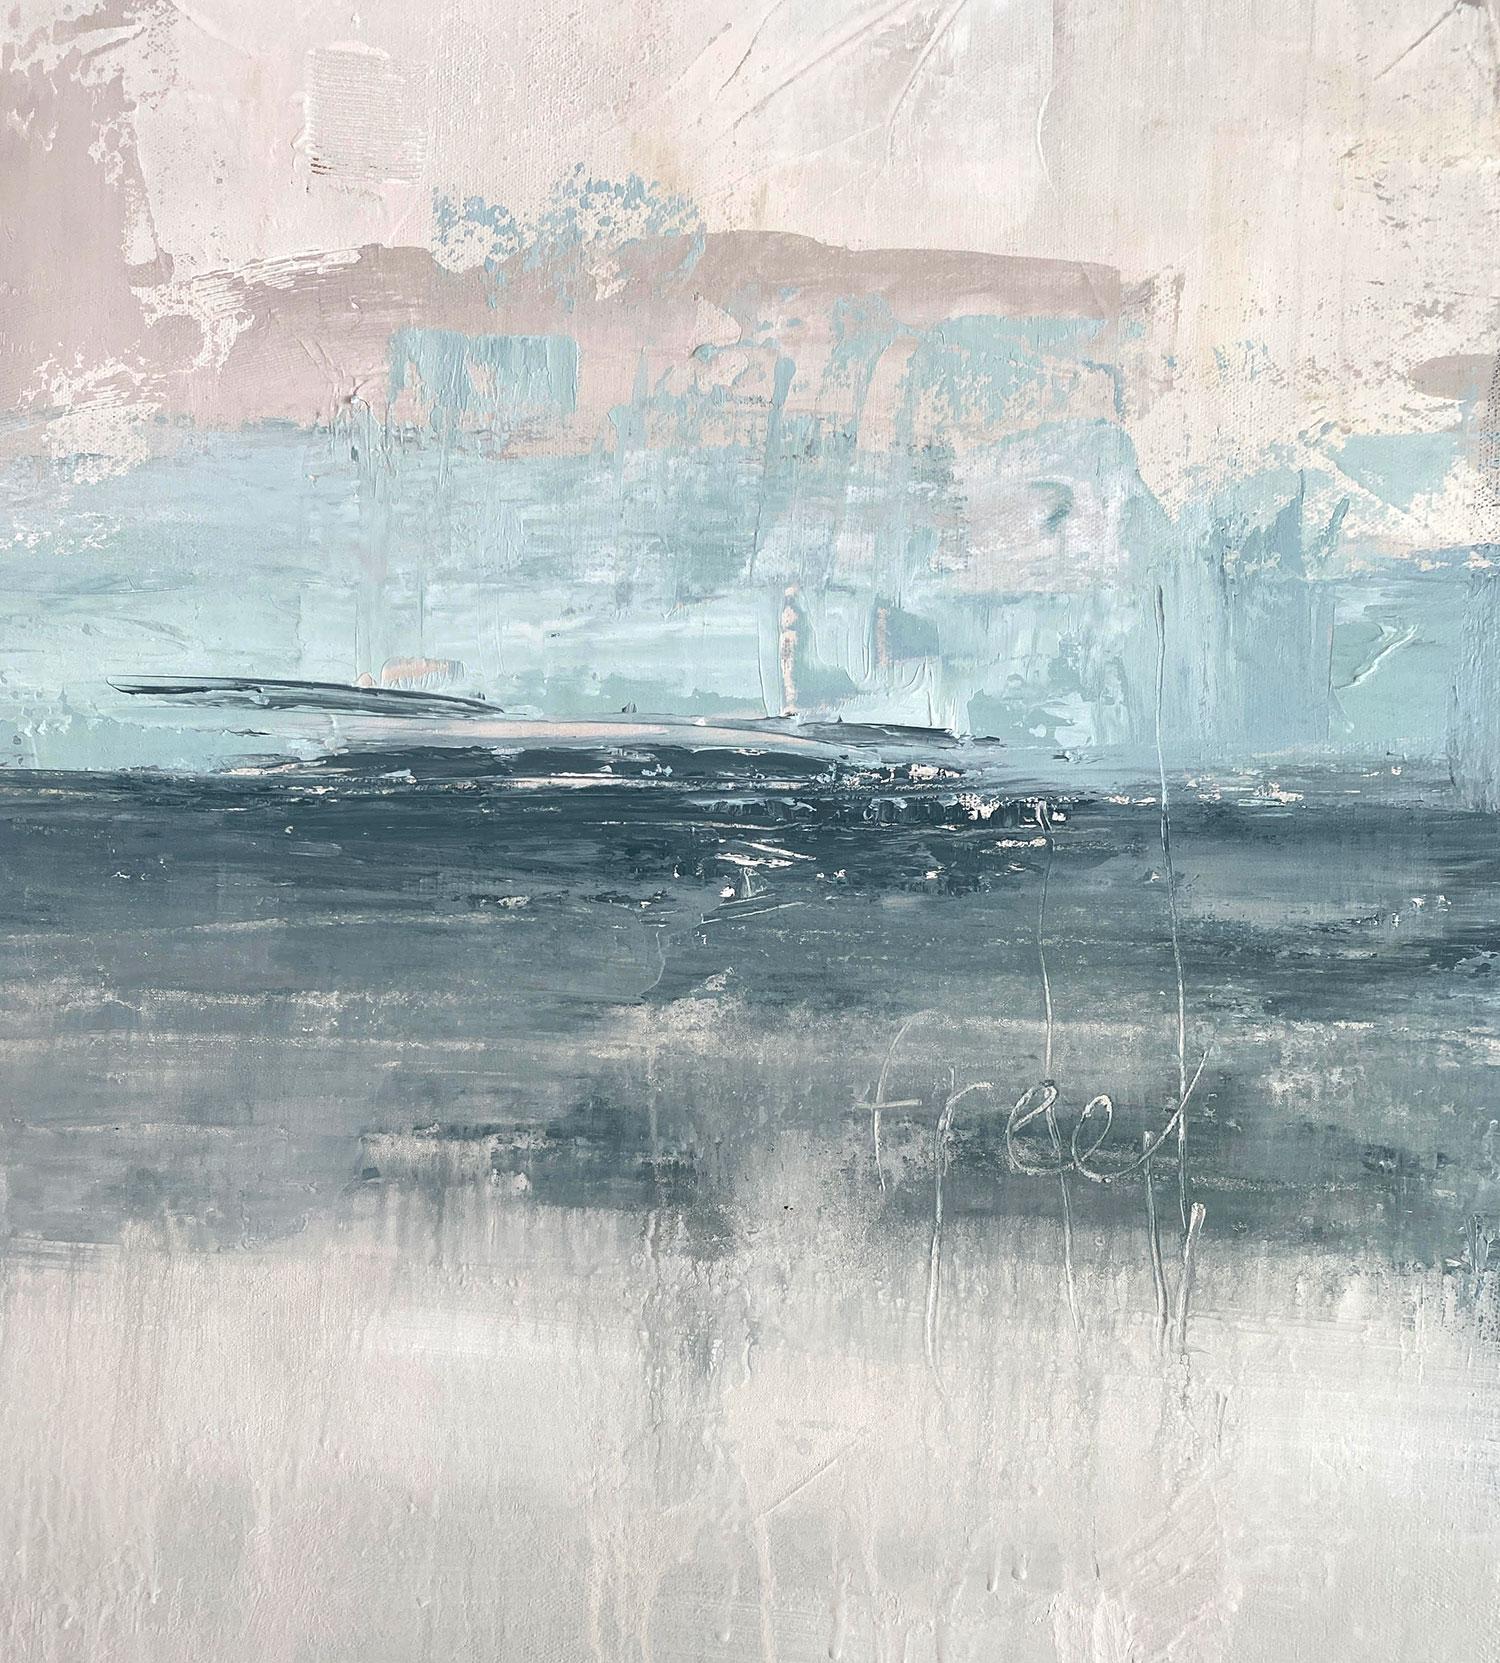 <p>Artist Comments<br>A cool abstract landscape in shades of beige, cream, and blue by artist Drew Noel Marin. A line of tonal blues colors the horizon where the word 